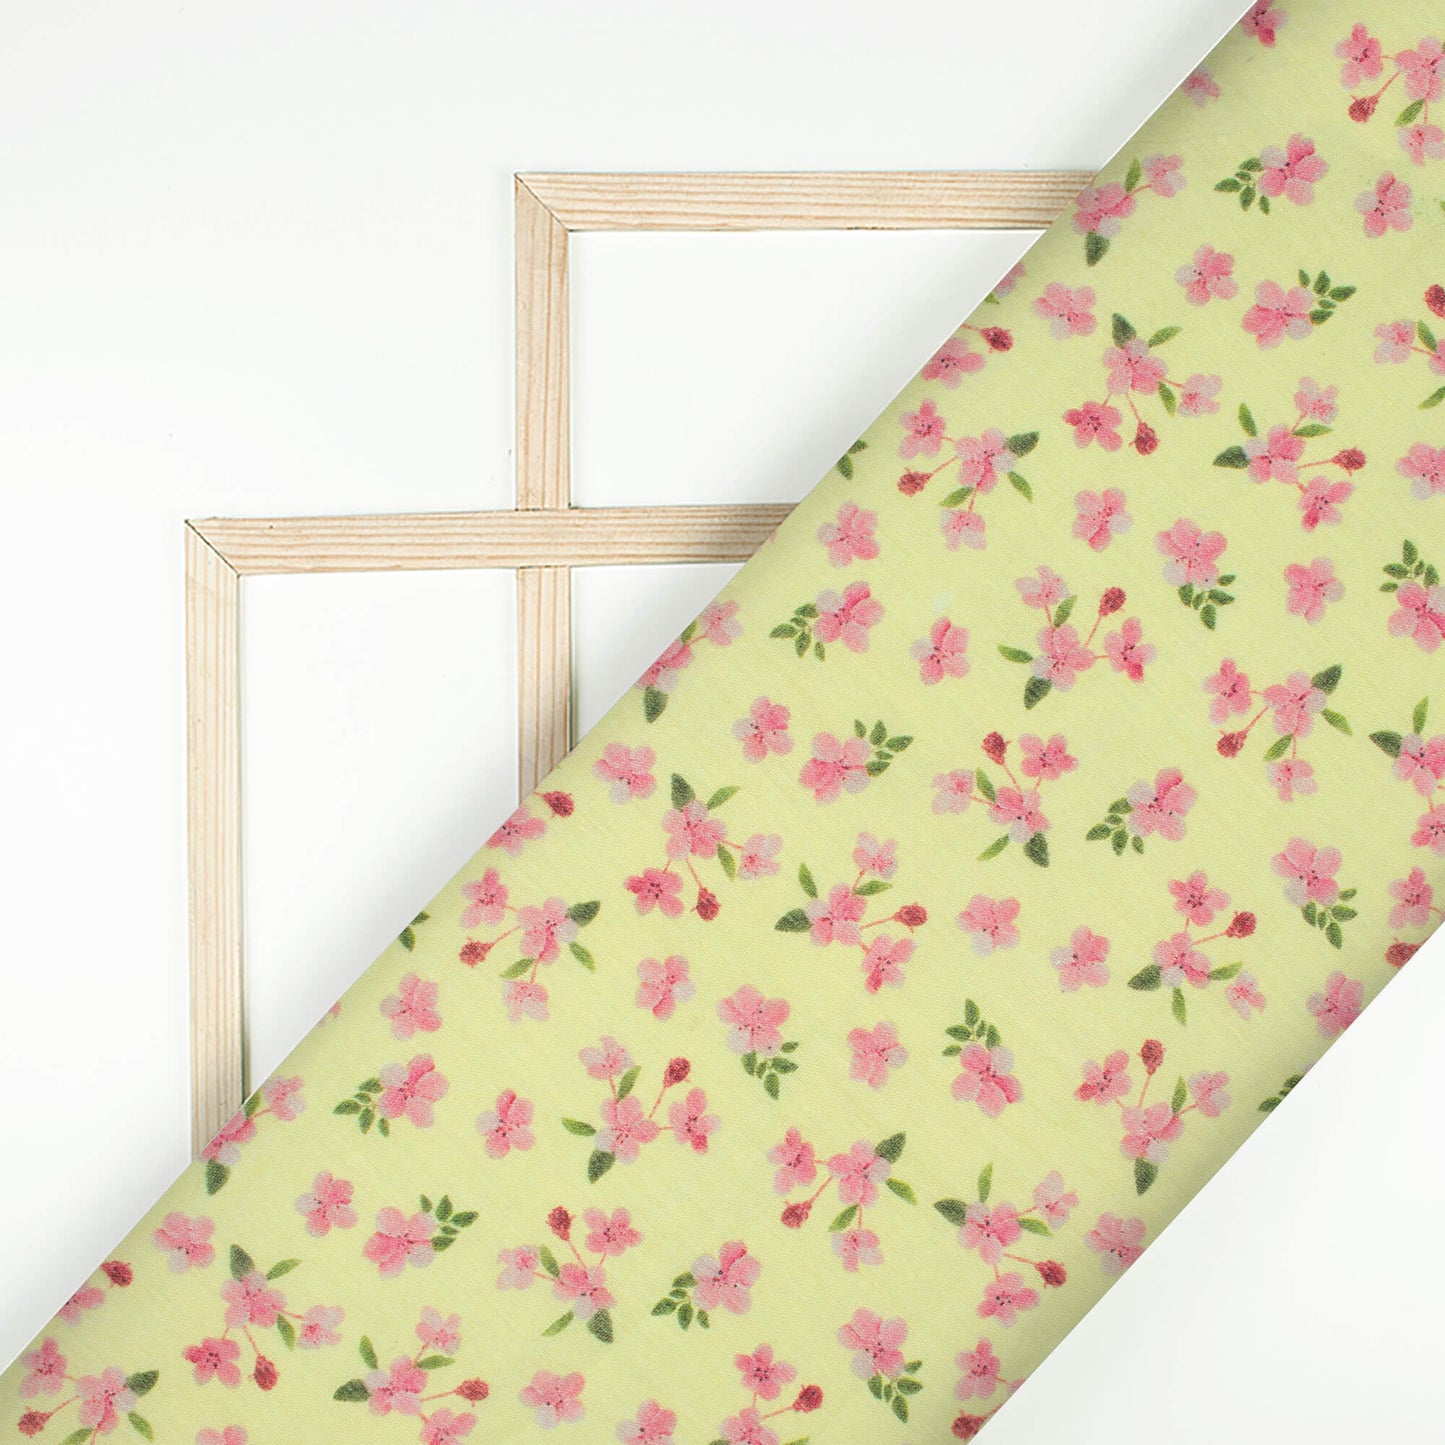 Lemon Yellow And Baby Pink Floral Pattern Digital Print Pure Cotton Mulmul Fabric